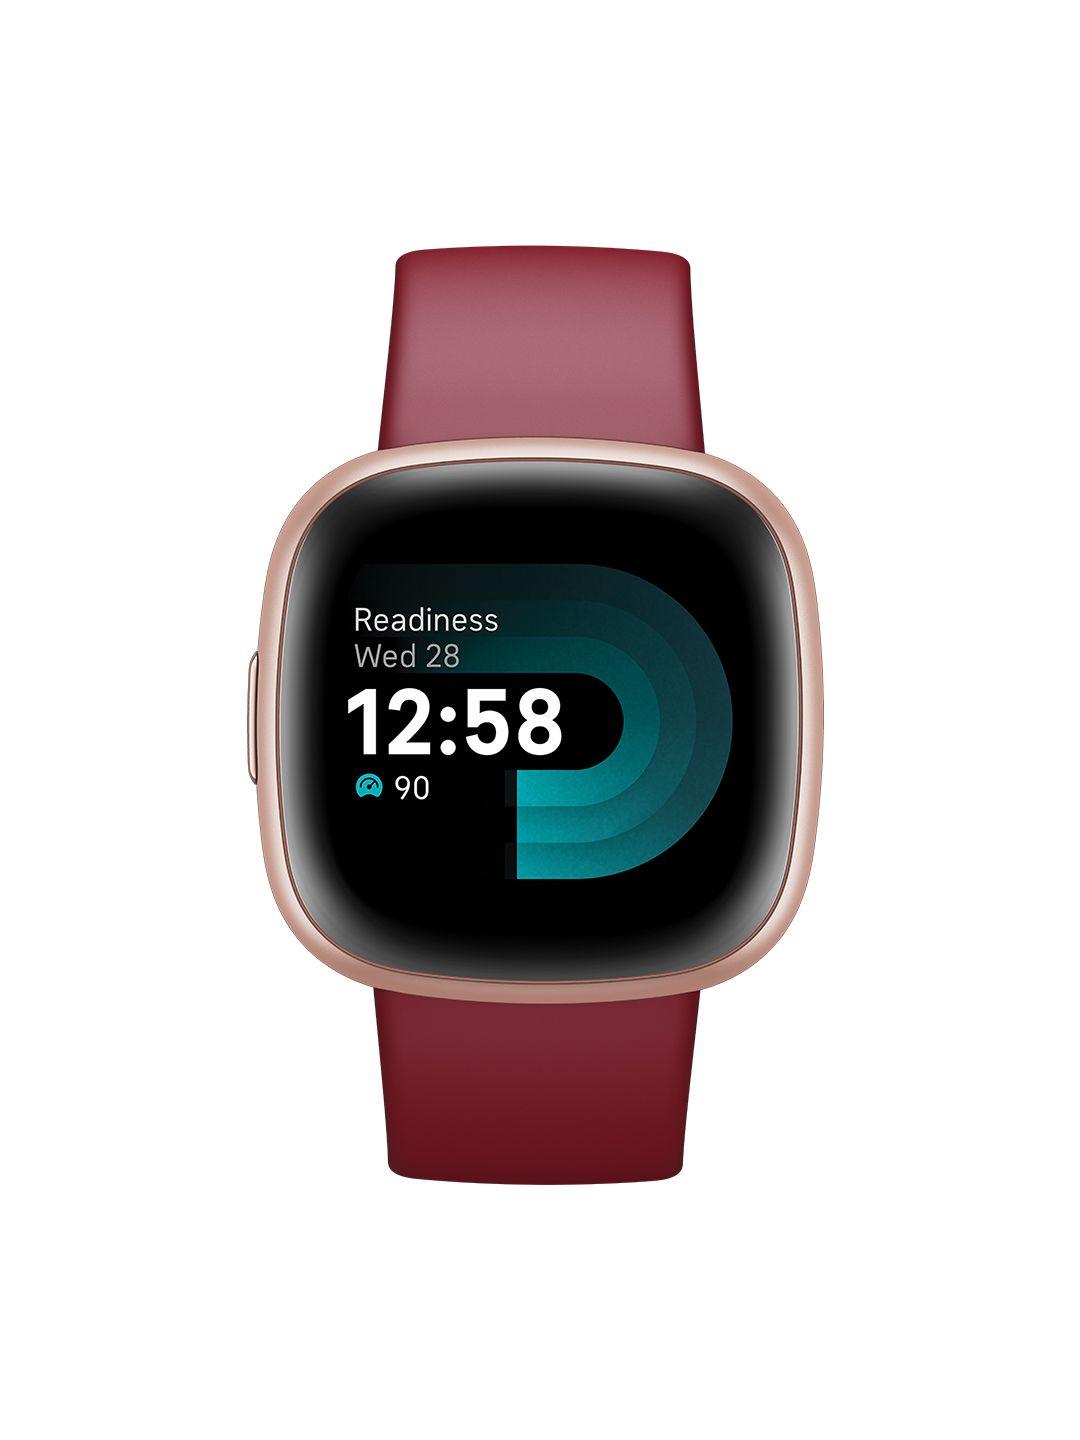 fitbit versa 4 fitness watch with daily readiness score + call + google assist.